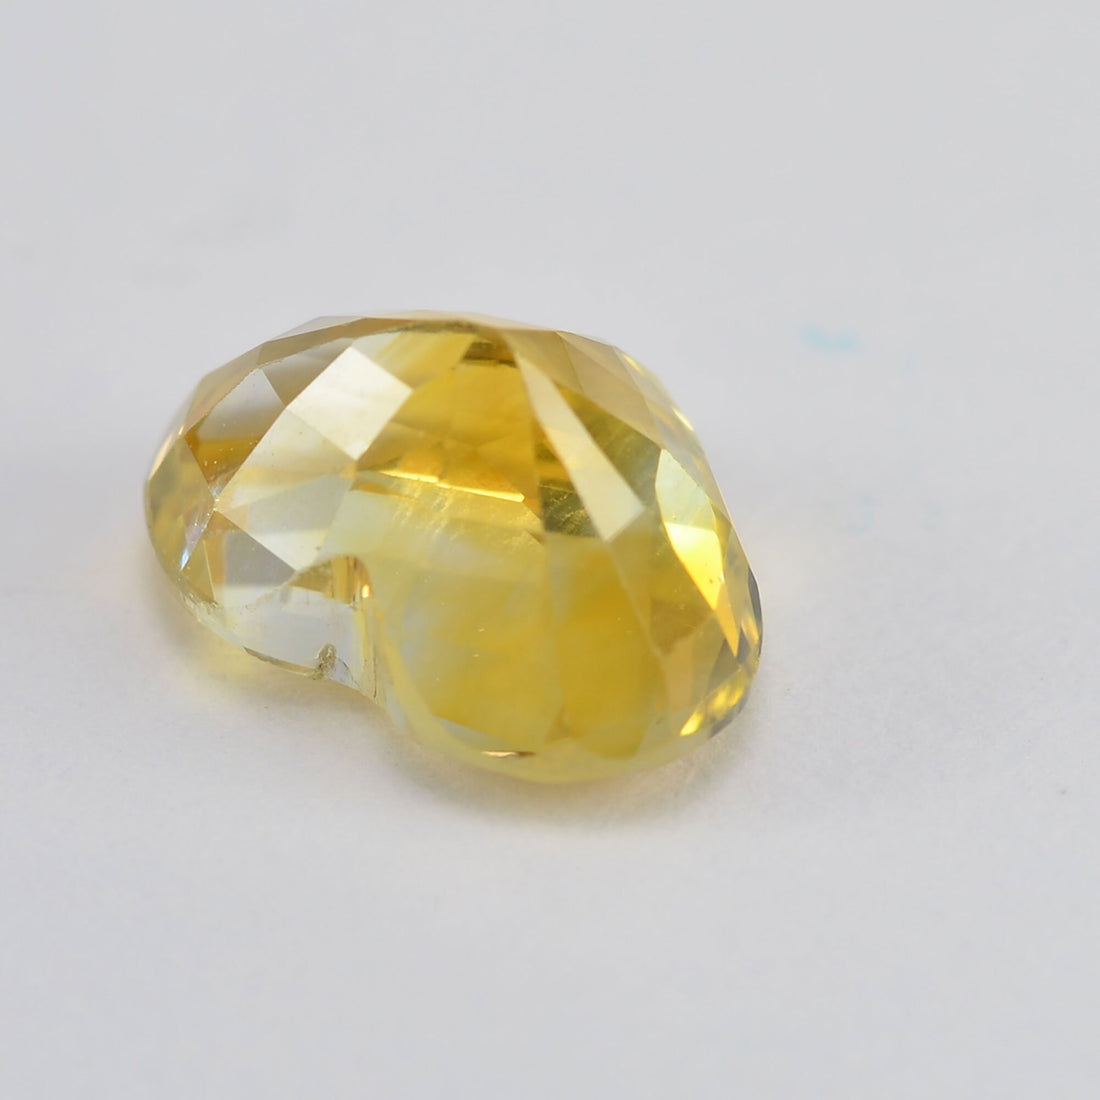 1.91 cts Natural Yellow Sapphire Loose Gemstone Heart Cut